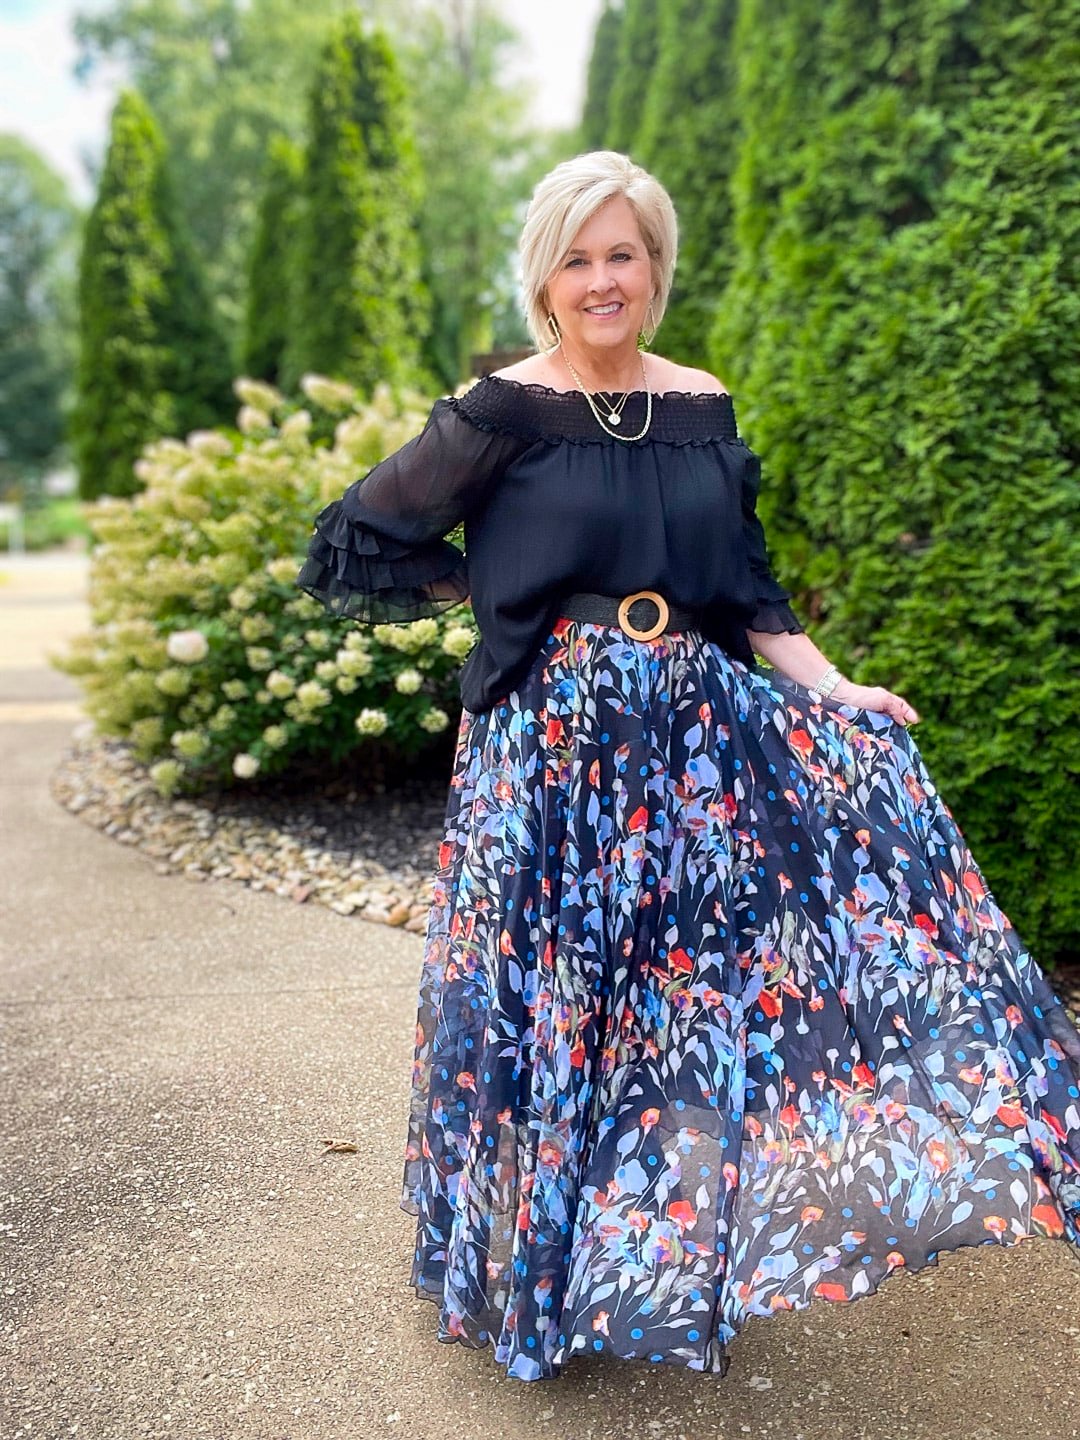 Over 40 Fashion Blogger, Tania Stephens is styling a floral chiffon skirt for a fall wedding14